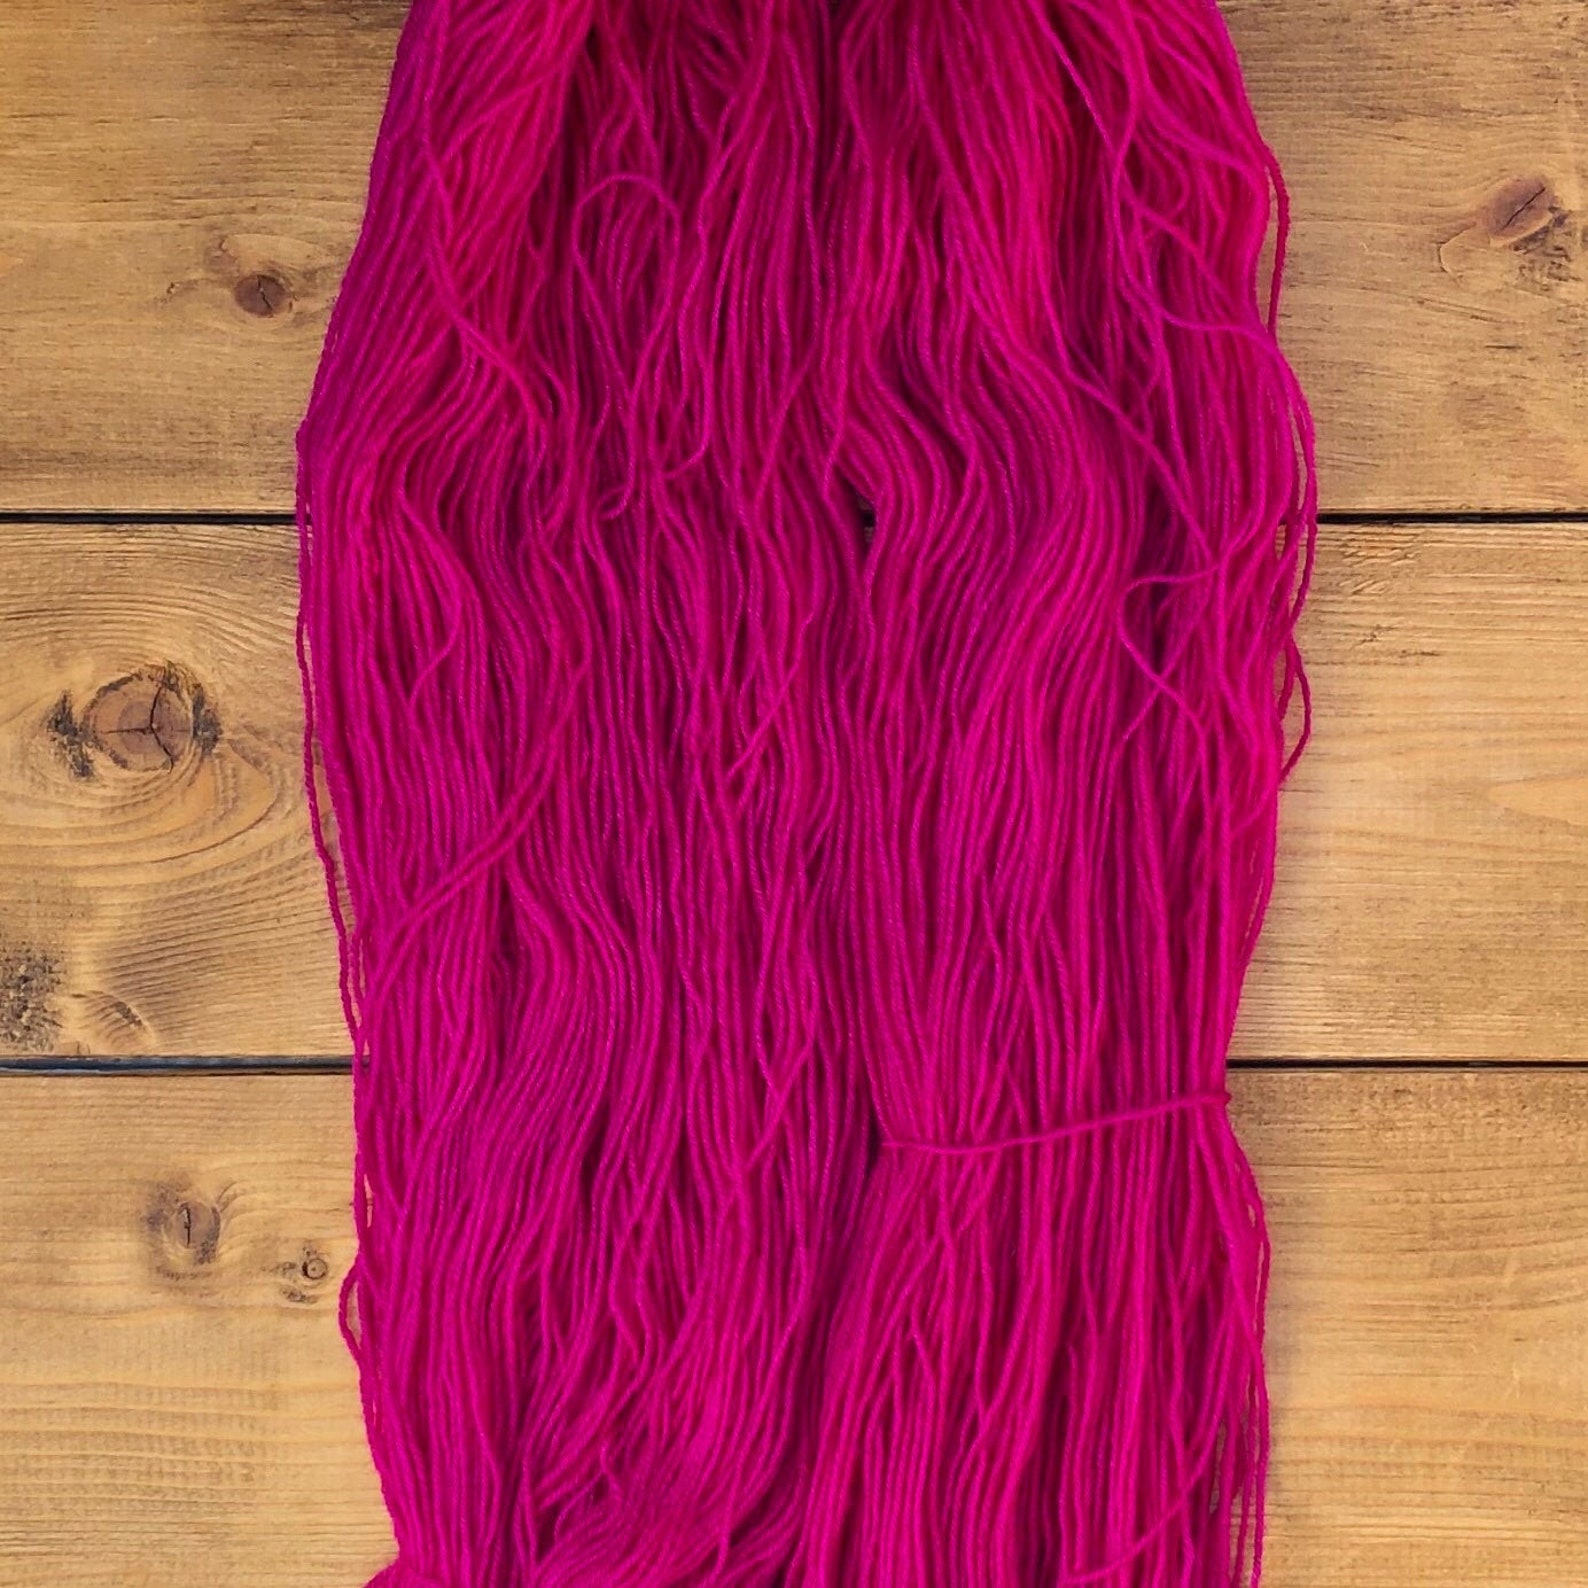 Magenta Pink Hand Dyed Yarn Hand Dyed Yarn for Knitting or - Etsy UK